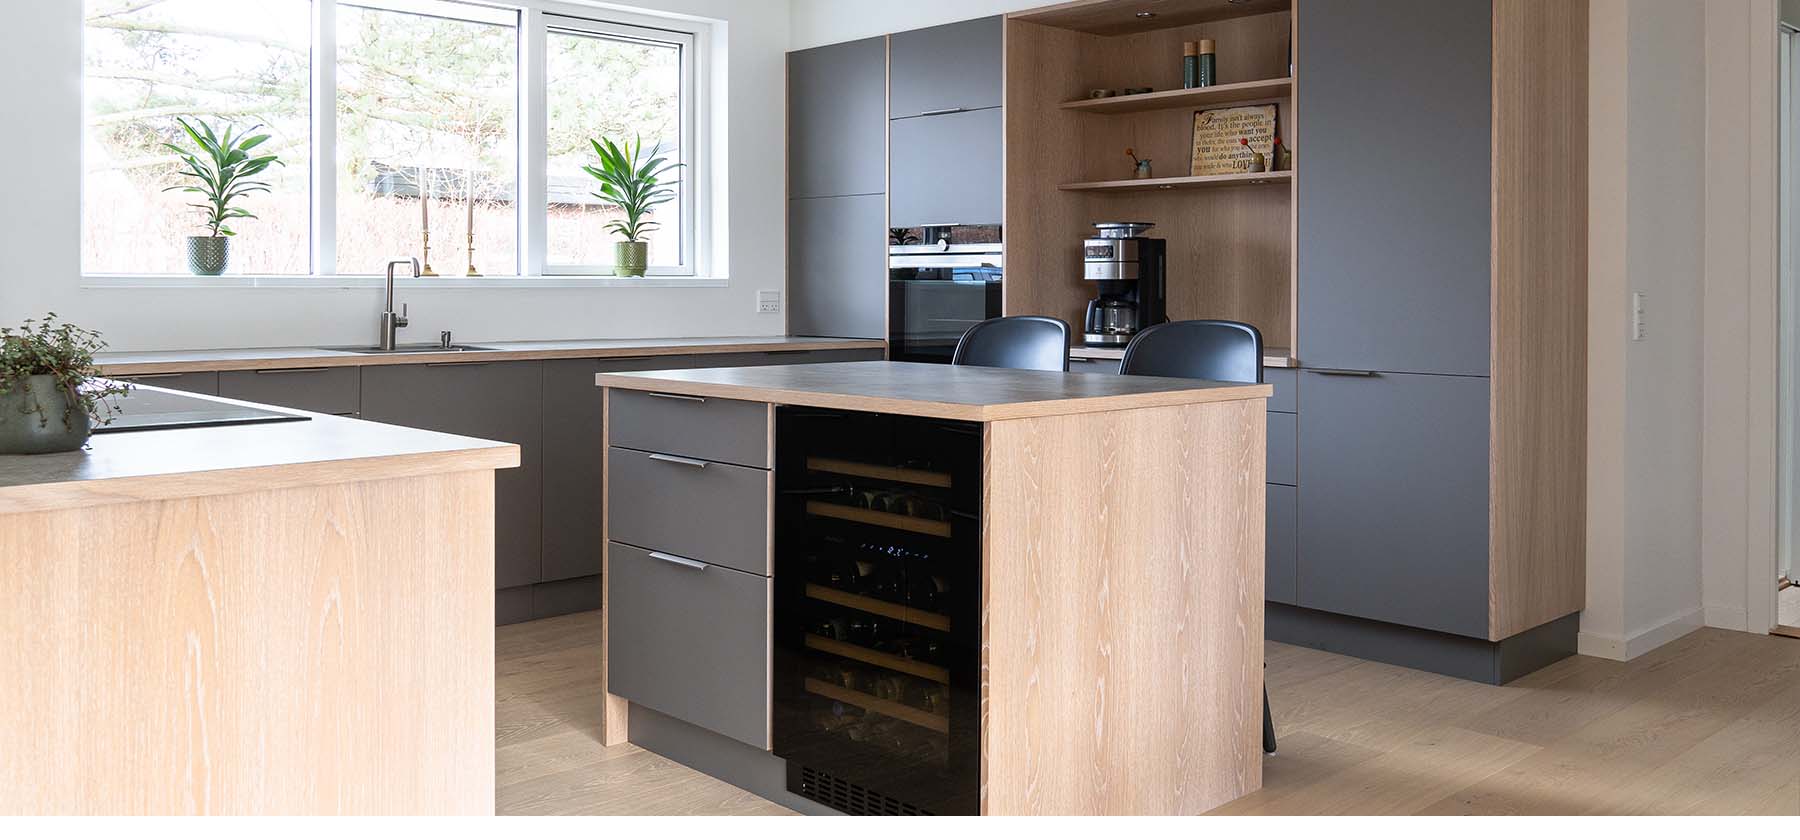 WELCOME <br > JOINER KITCHENS DESIGNED AND CREATED FOR YOU <br>